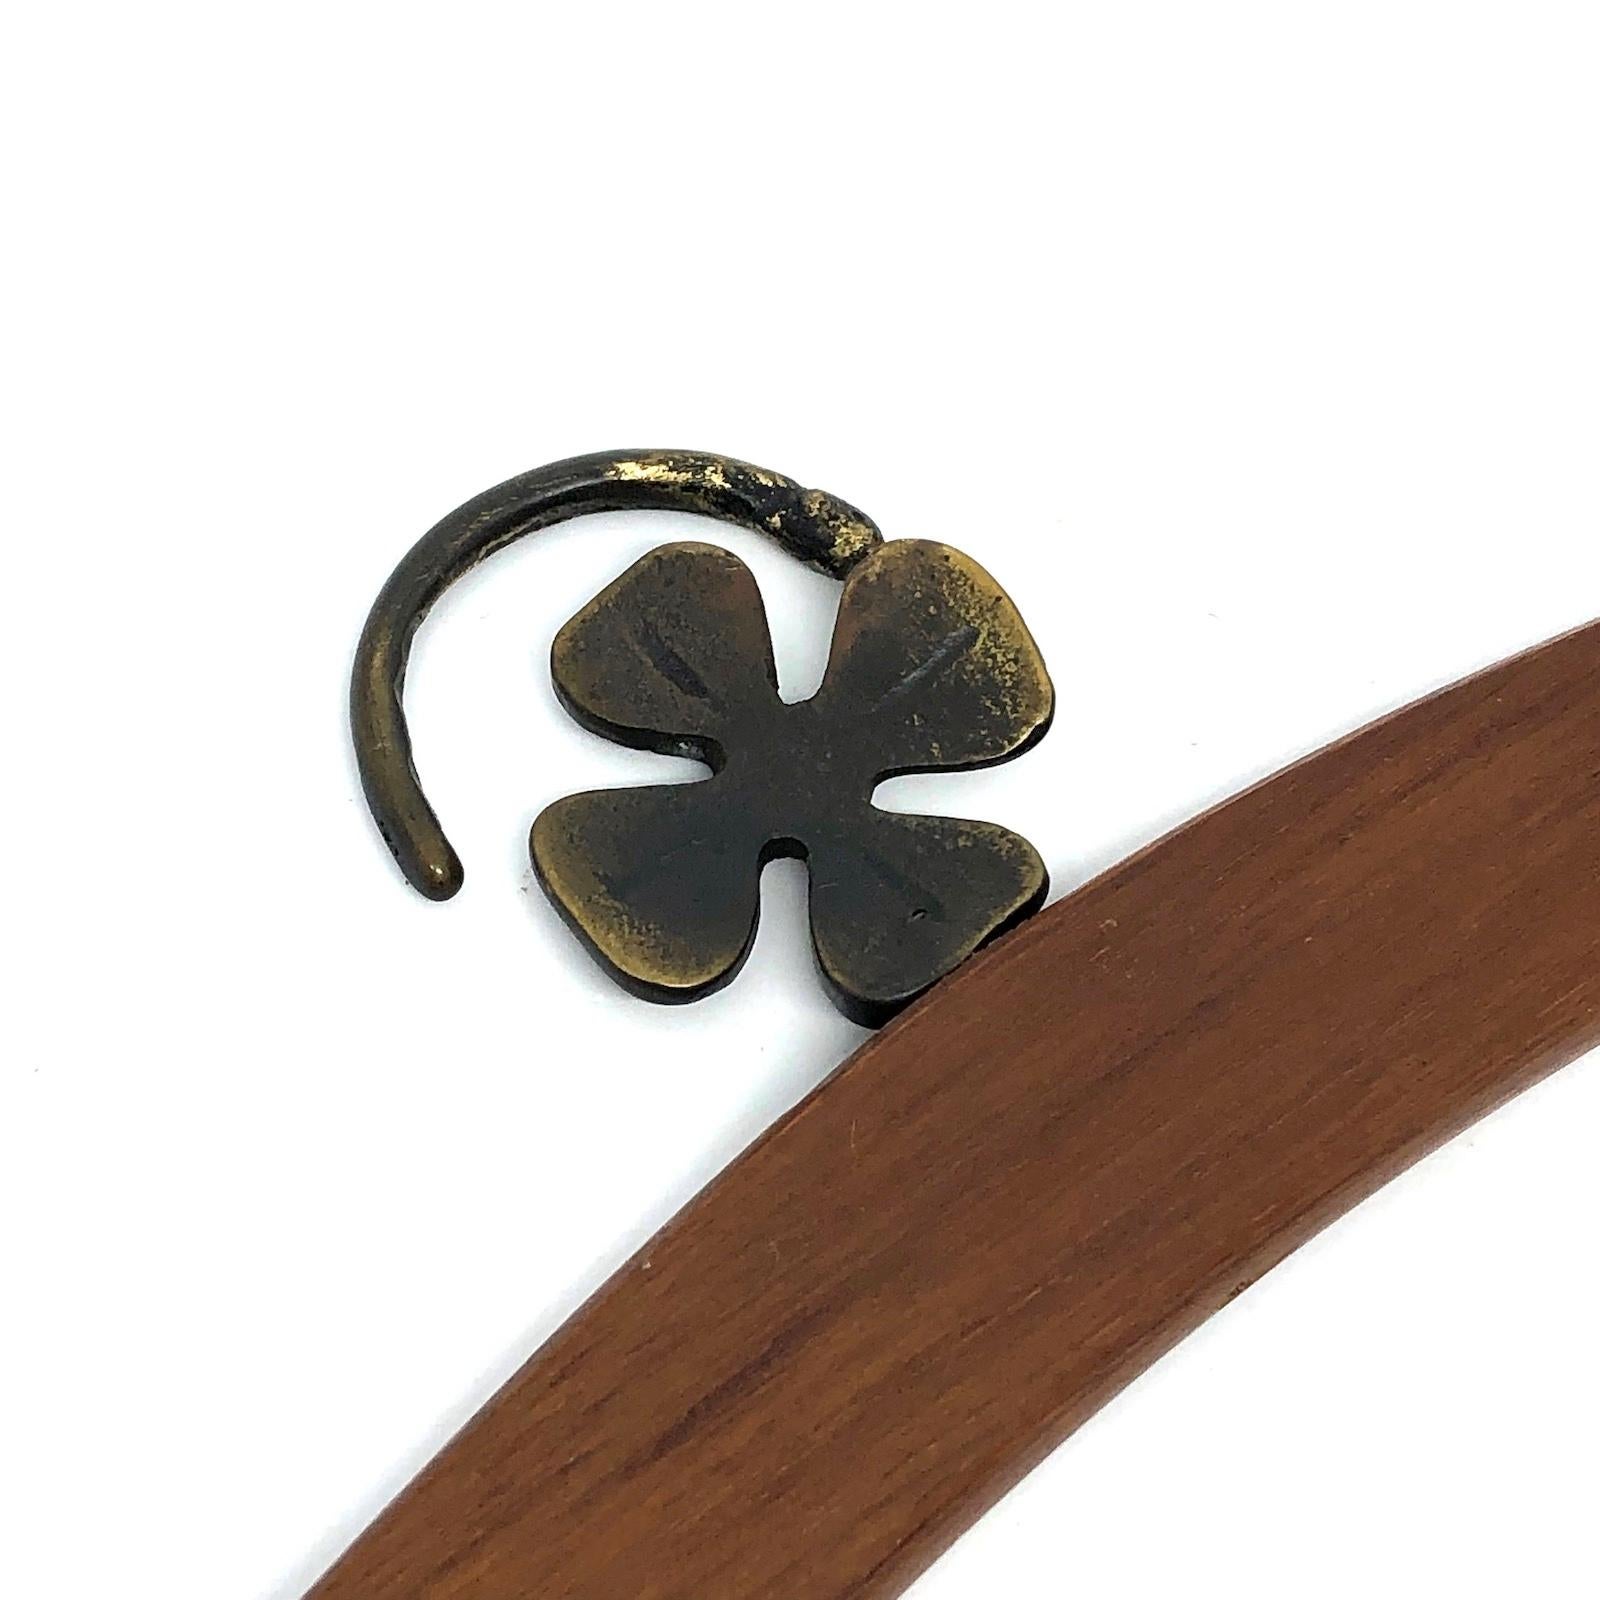 Classic early 1950s Austrian Walter Bosse coat hanger in the form of a Lucky Clover. Nice addition to your room or just for your collection of Austrian bronze items. Found at an estate sale in Vienna, Austria. Made of teak wood and bronze (metal).